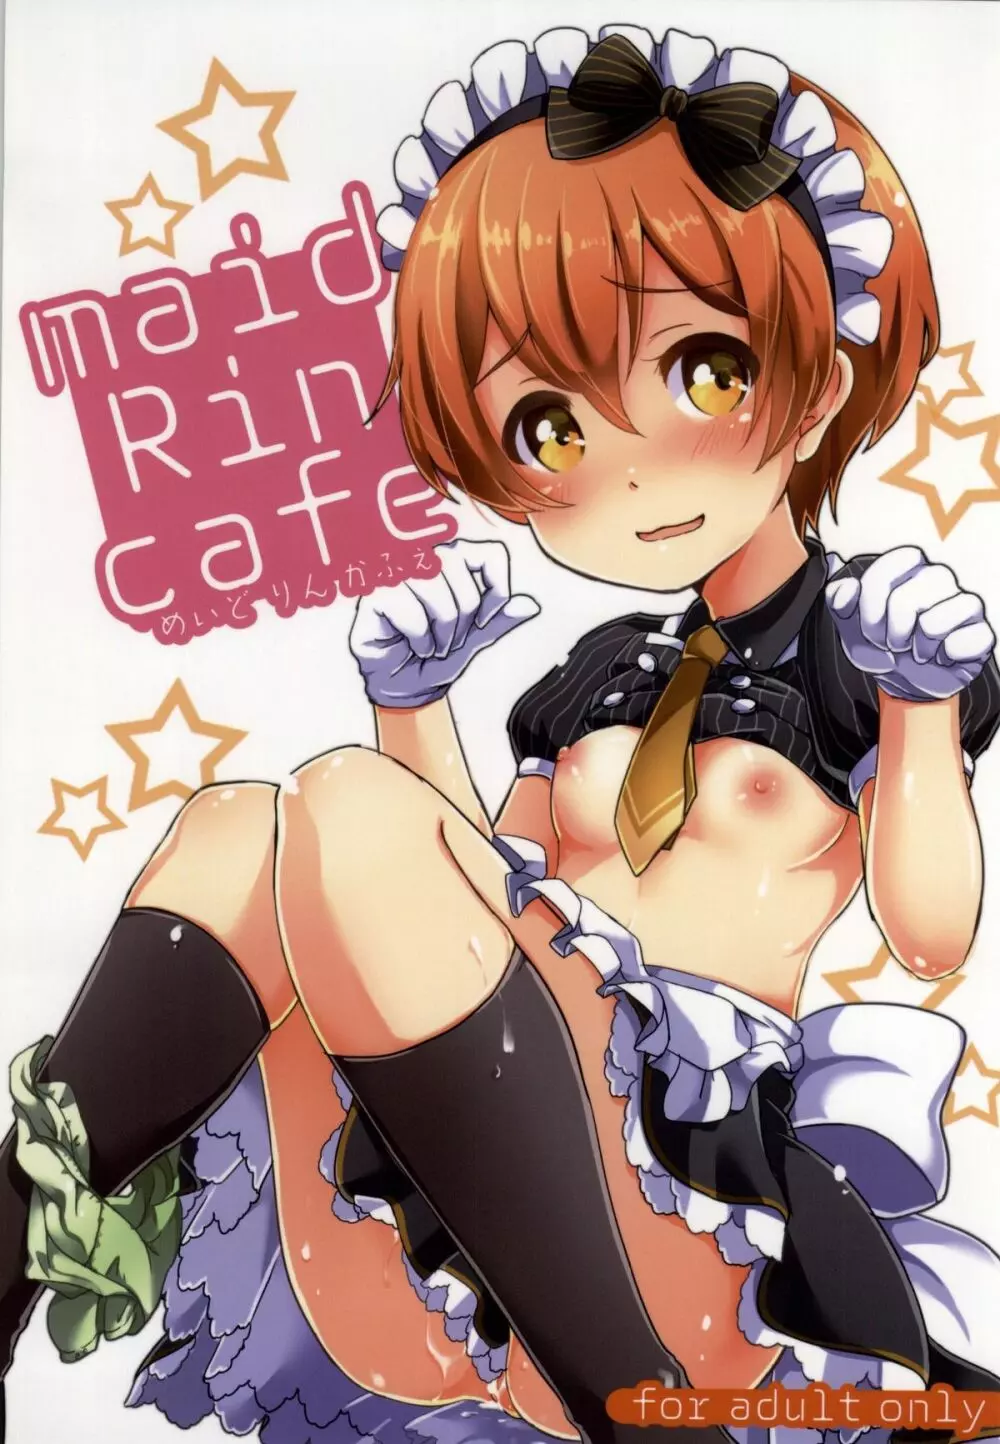 maid Rin cafe - page1